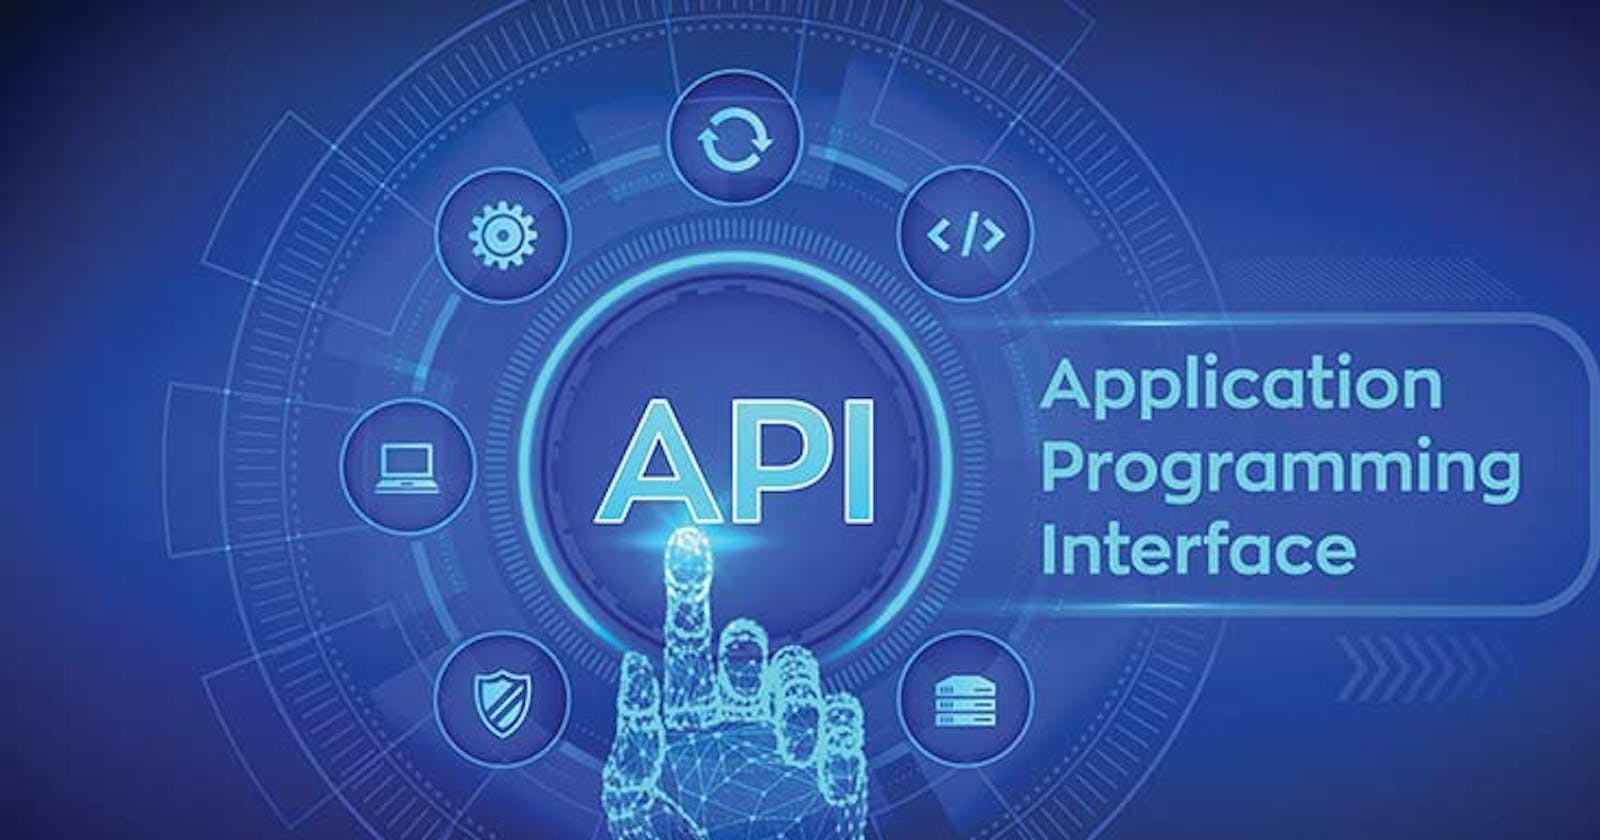 What Is an API and How Does It Work?